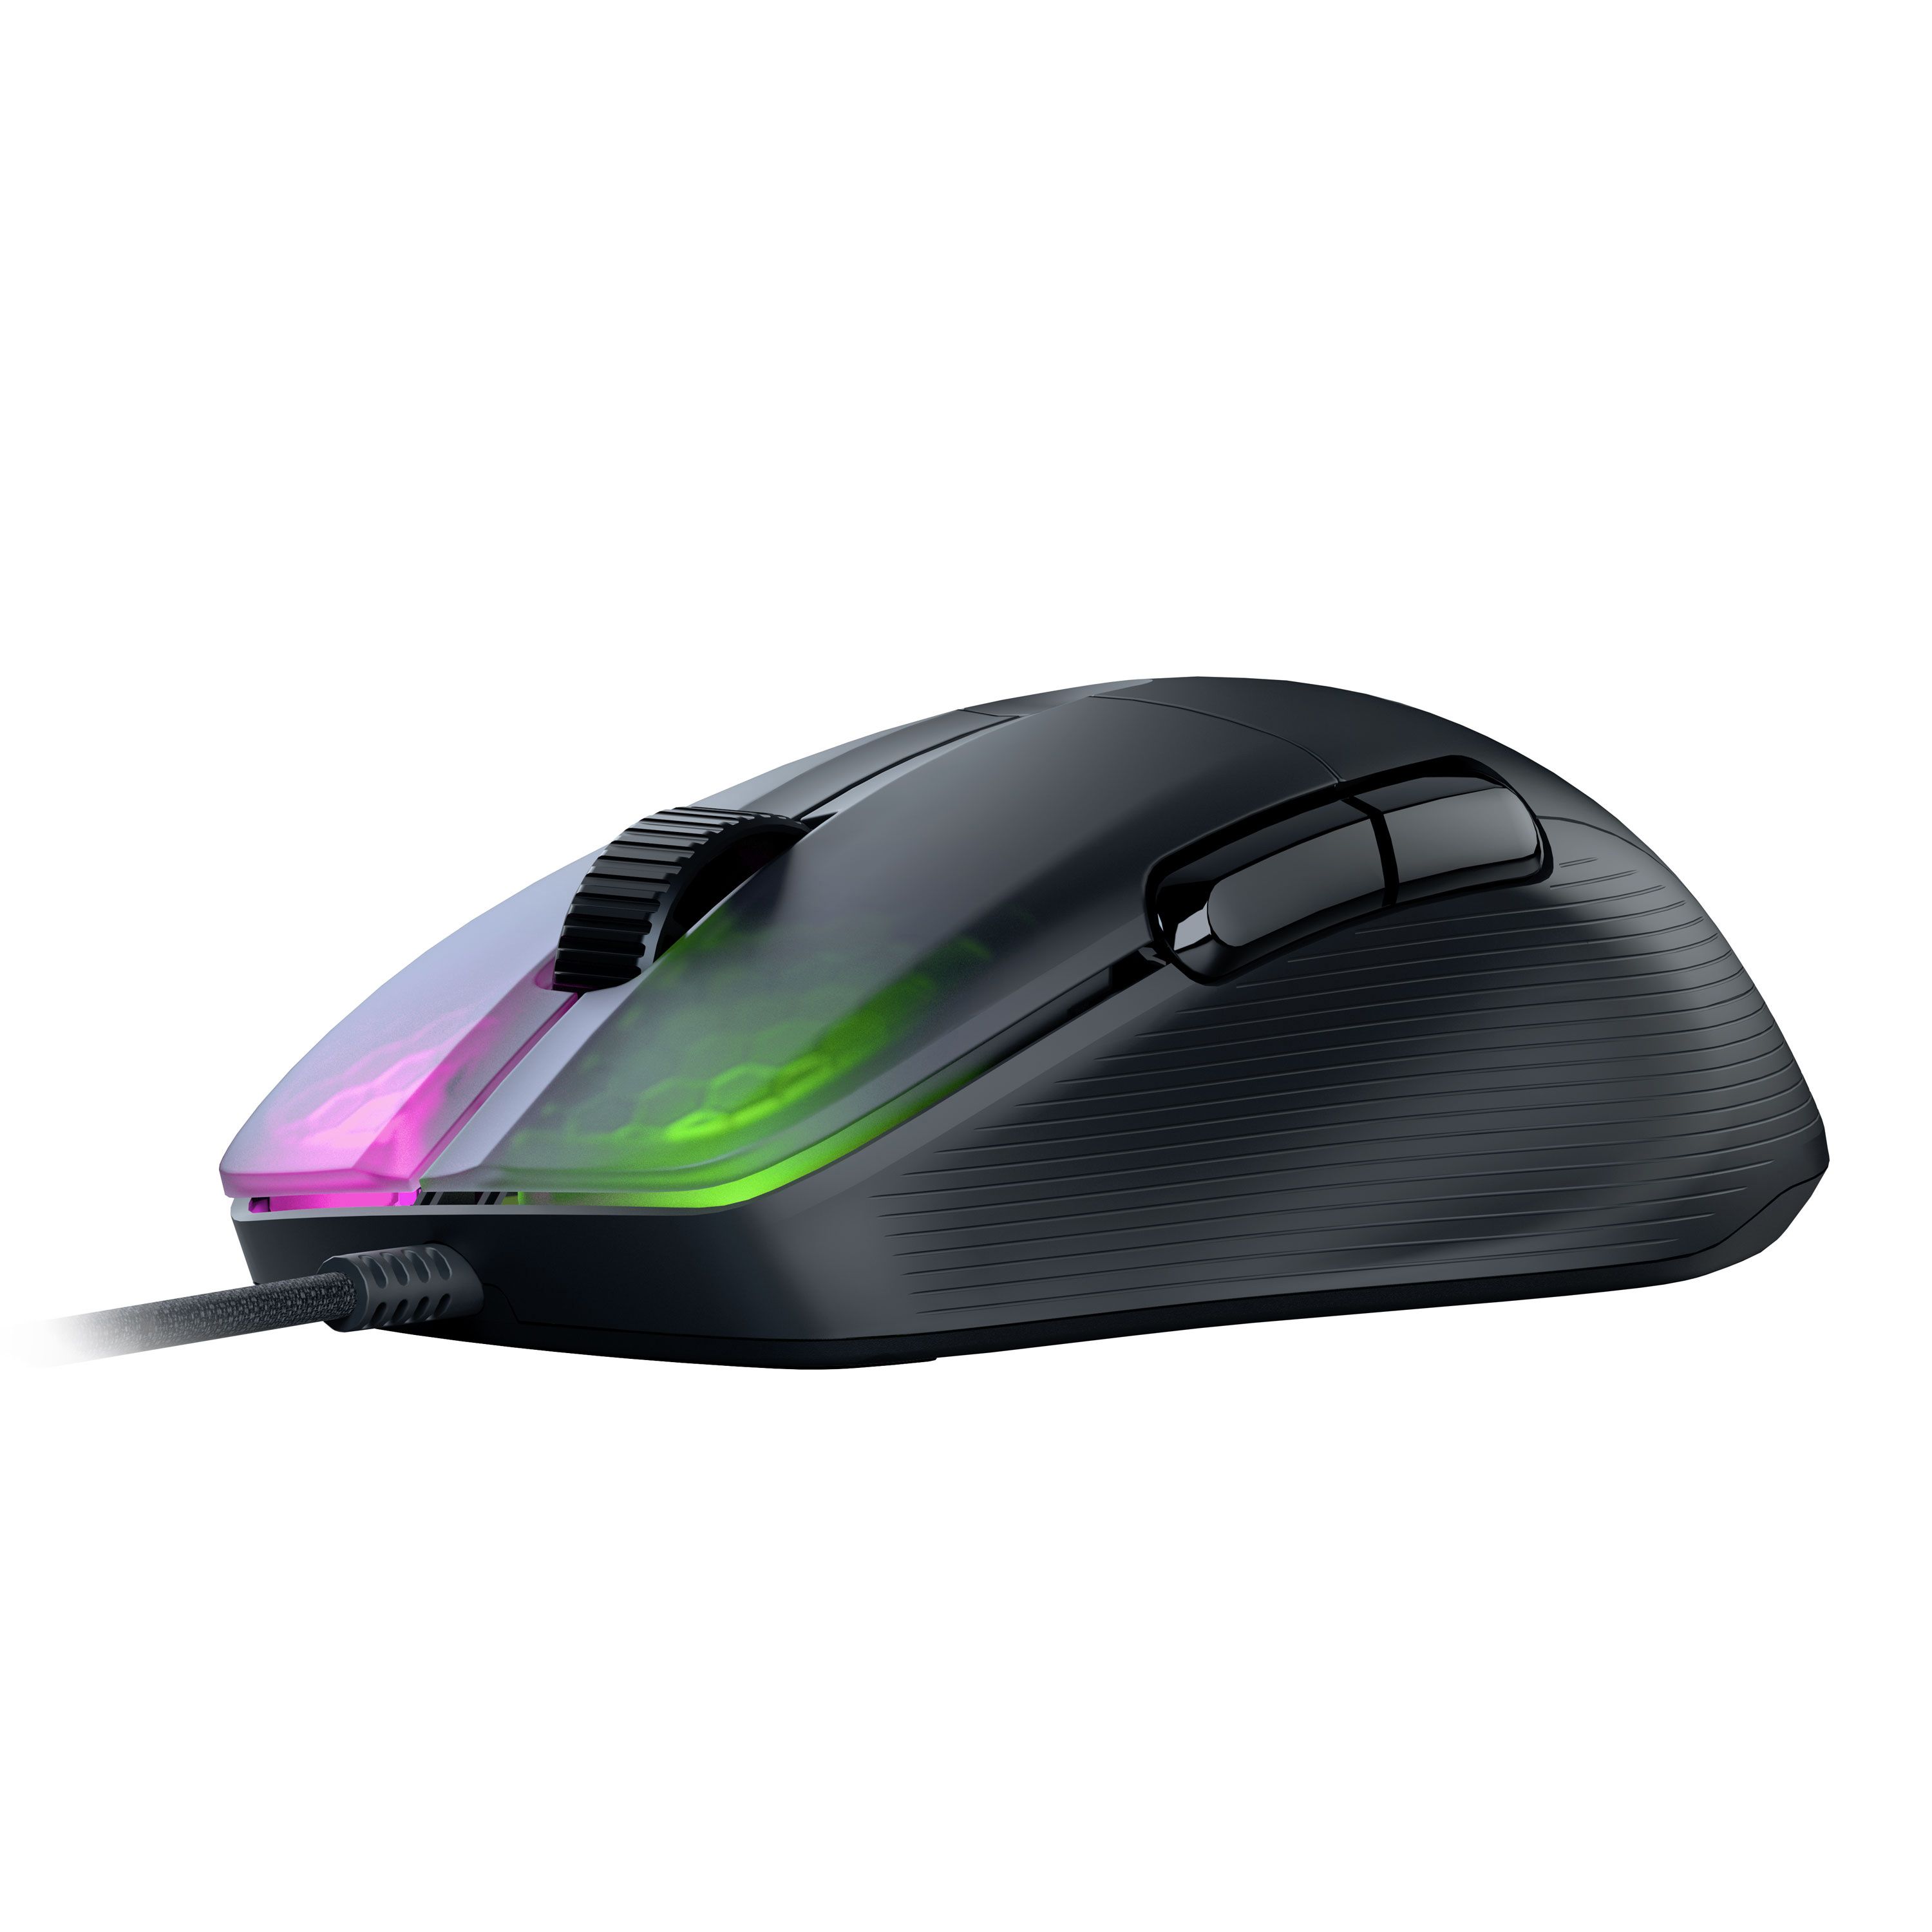 ROCCAT Kone Pro PC Gaming Mouse, Lightweight Ergonomic Design, Titan Switch Optical, AIMO RGB Lighting, Superlight Wired Computer Mouse, Titan Scroll Wheel, Honeycomb Shell, 19K DPI, Black - image 2 of 7